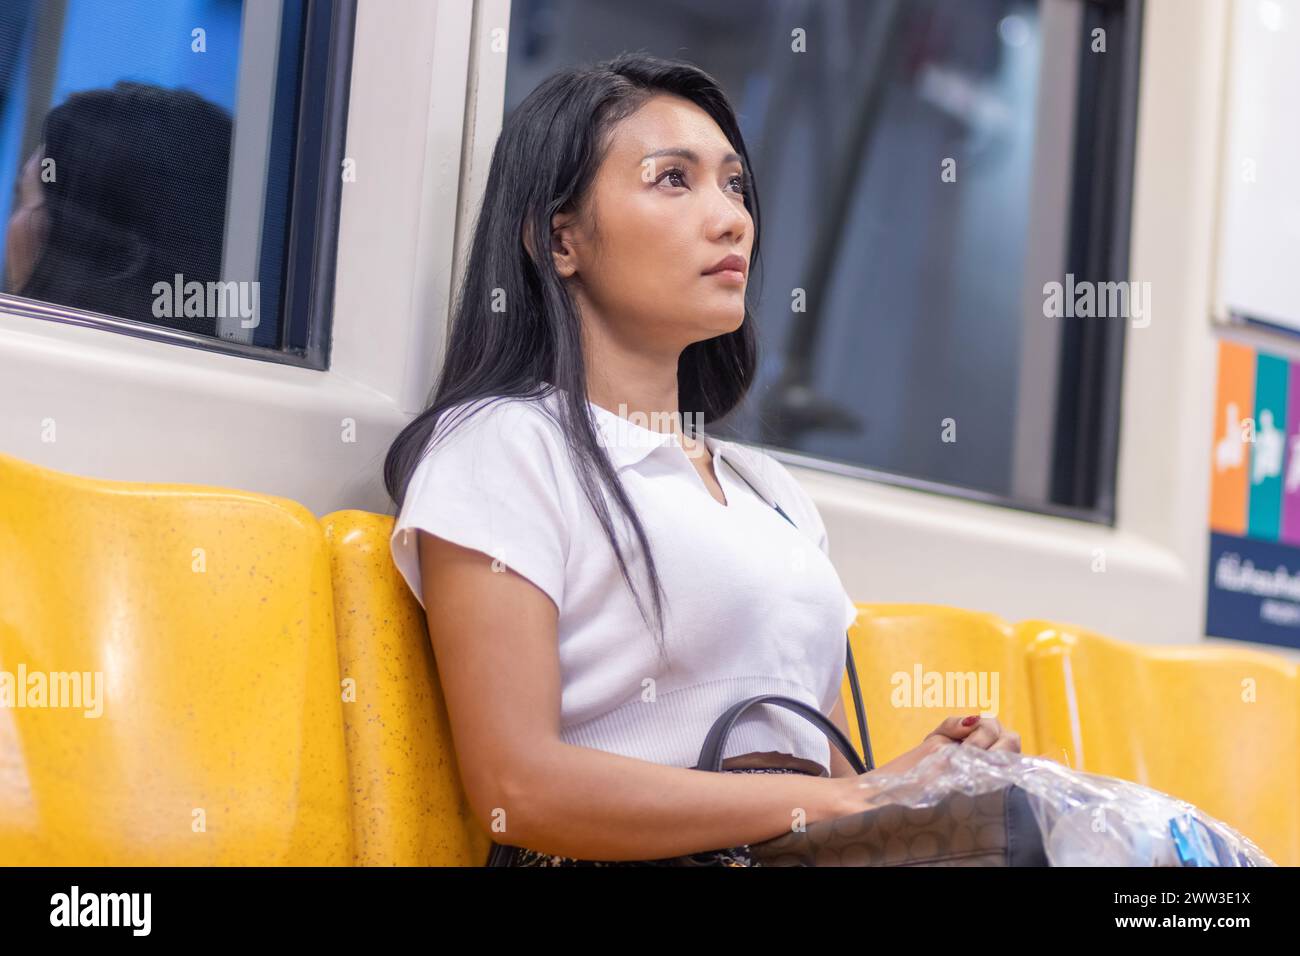 A young woman is sitting in a subway train Stock Photo